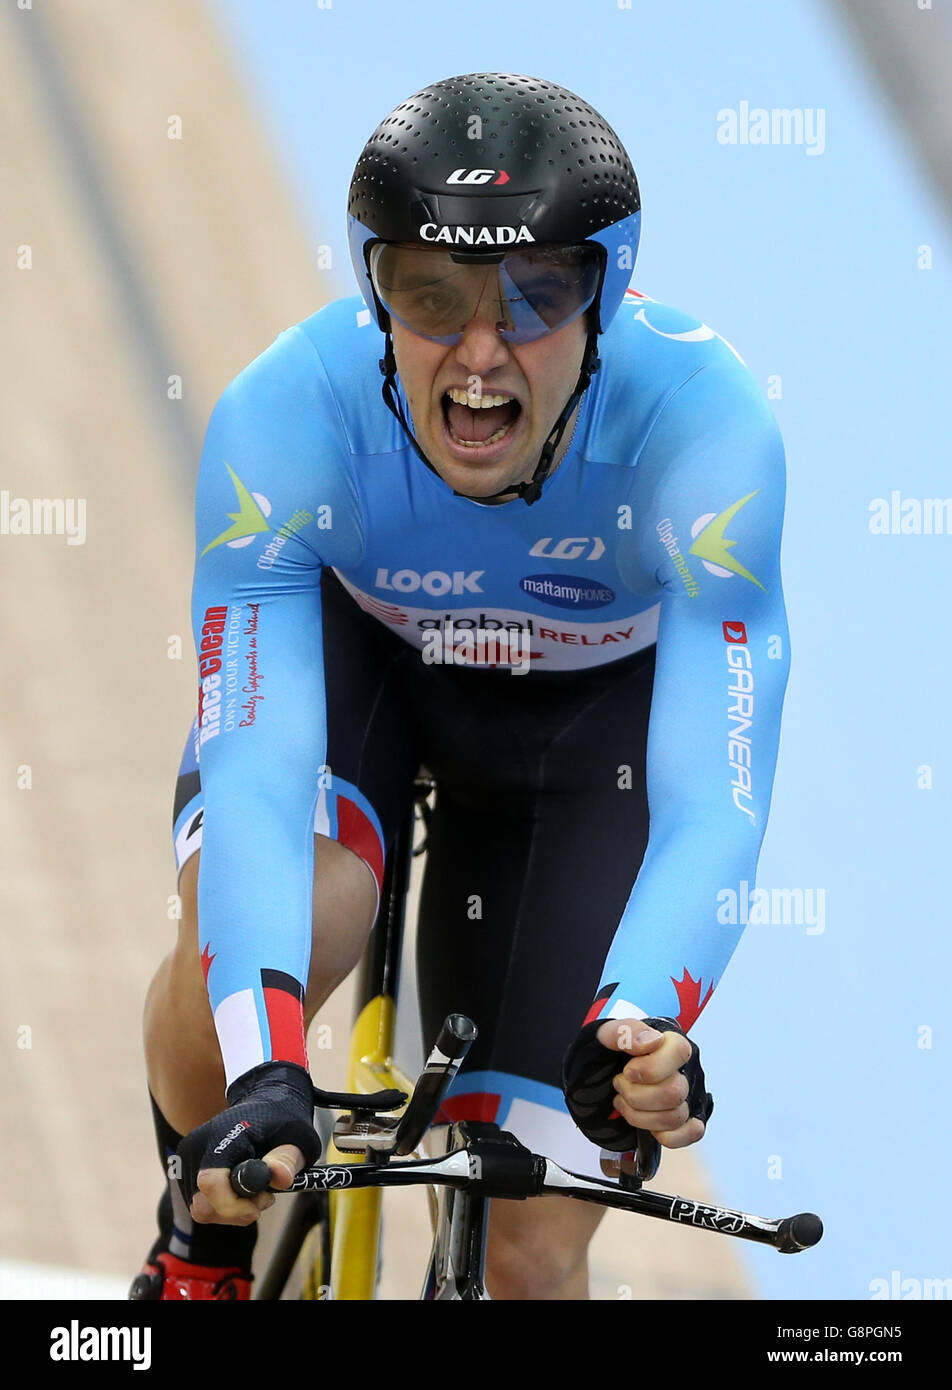 Canada's Remi Pelletier-Roy during day three of the UCI Track Cycling World Championships at Lee Valley VeloPark, London. PRESS ASSOCIATION Photo. Picture date: Friday March 4, 2016. See PA story CYCLING World. Photo credit should read: Tim Goode/PA Wire. Stock Photo